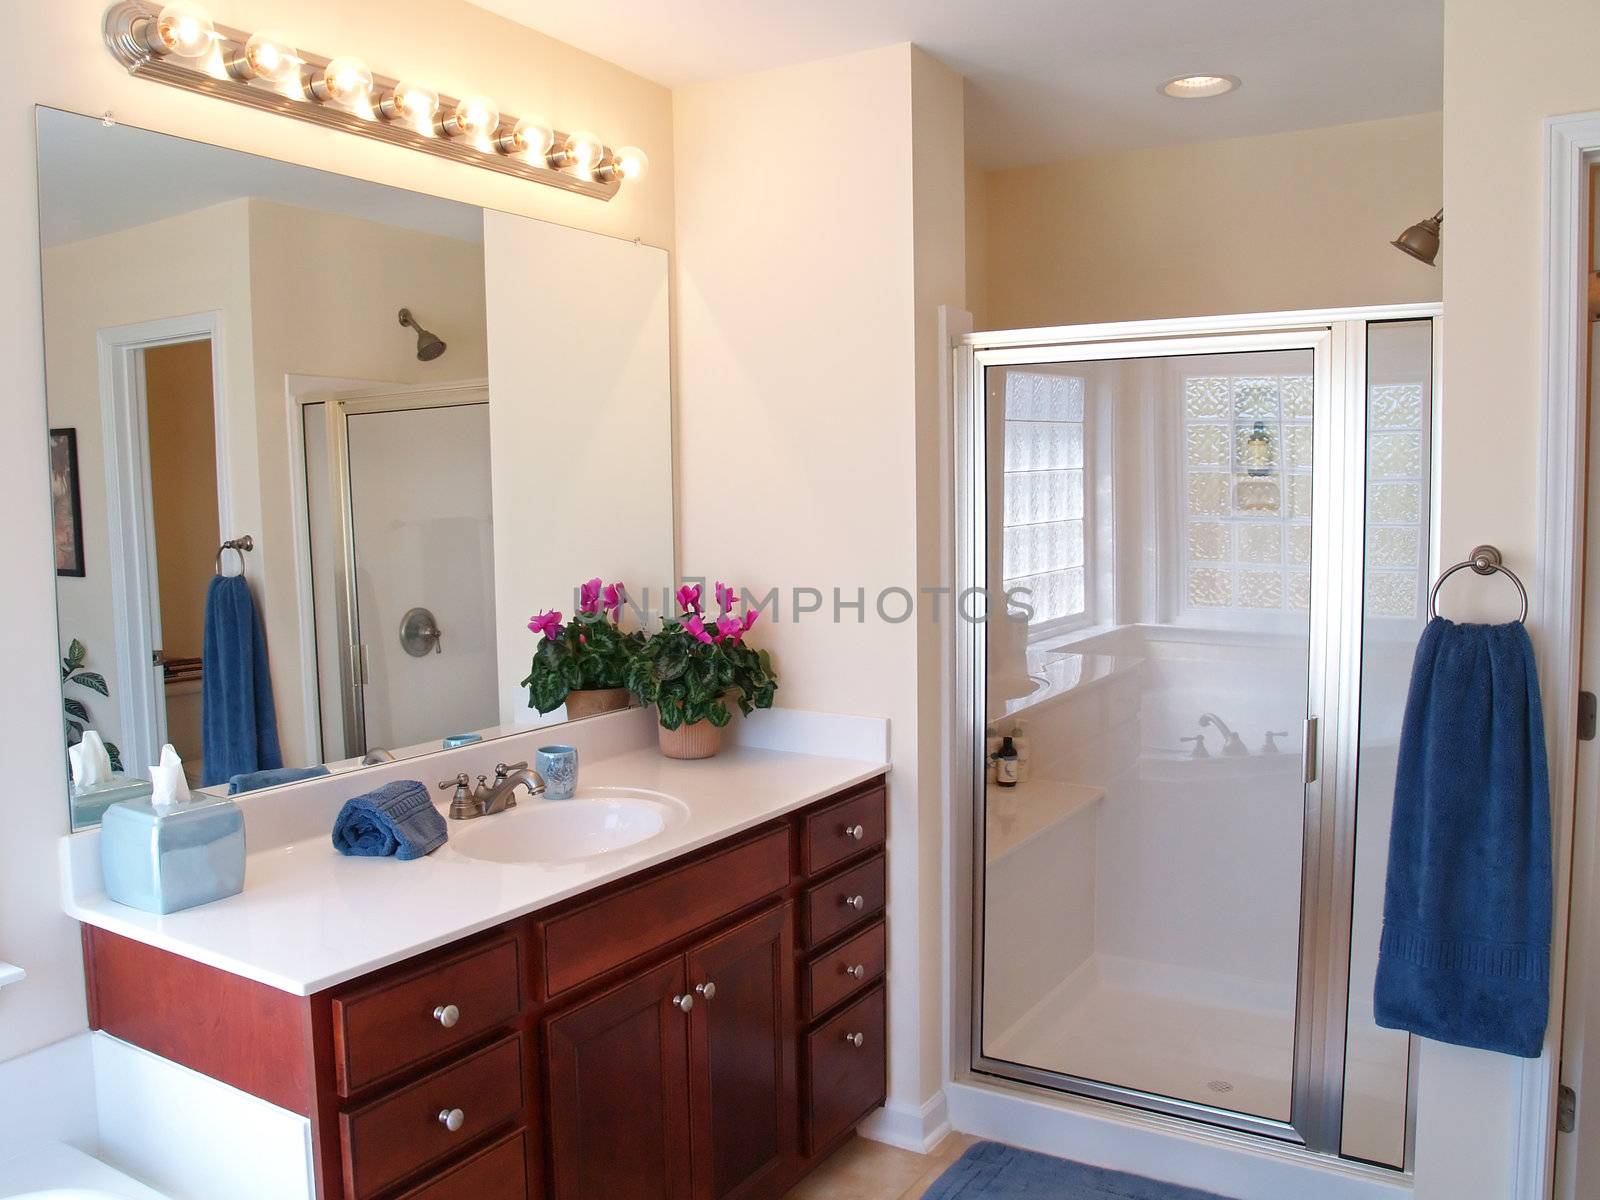 Modern Bathroom with a wooden vanity, glass door on the shower, and a large mirror with lights above.